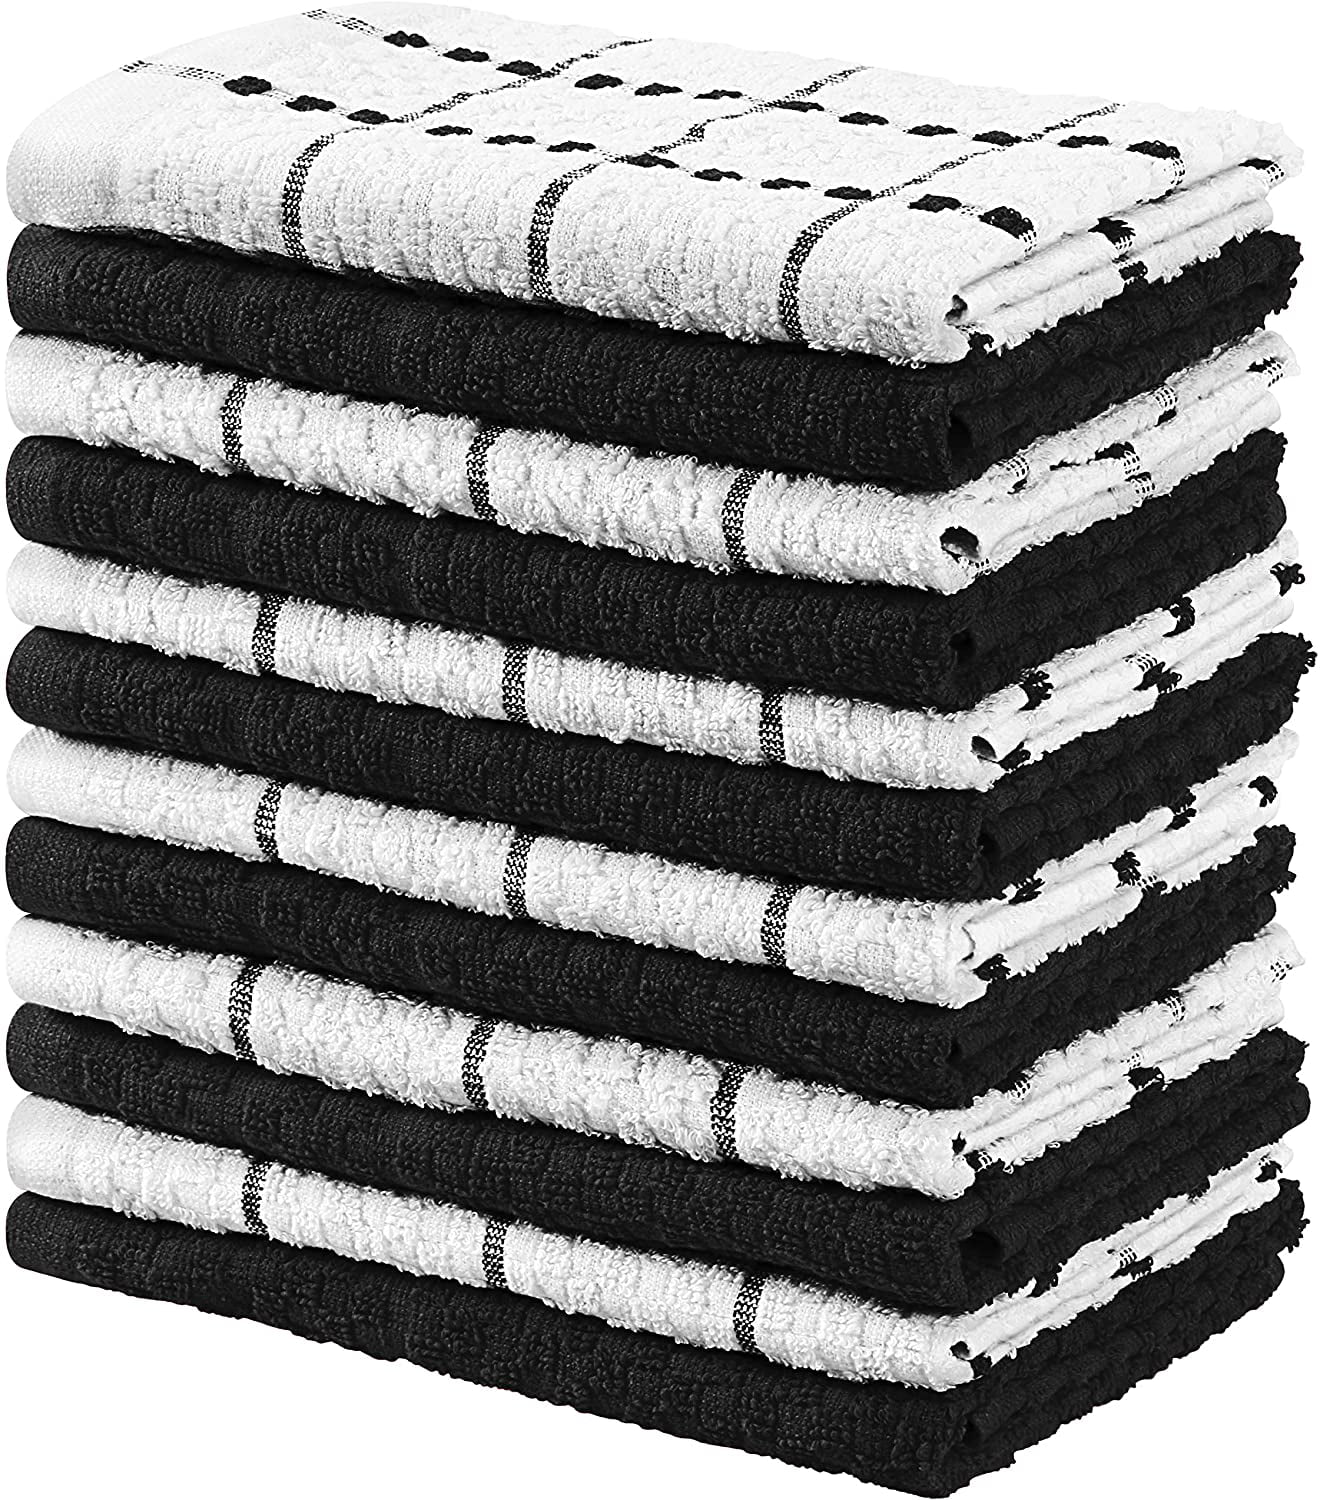 Microfiber Kitchen Towels Stripe Designed Grey and White Colors 8 Pack Super Absorbent Soft and Solid Color Dish Towels 26 x 18 Inch 